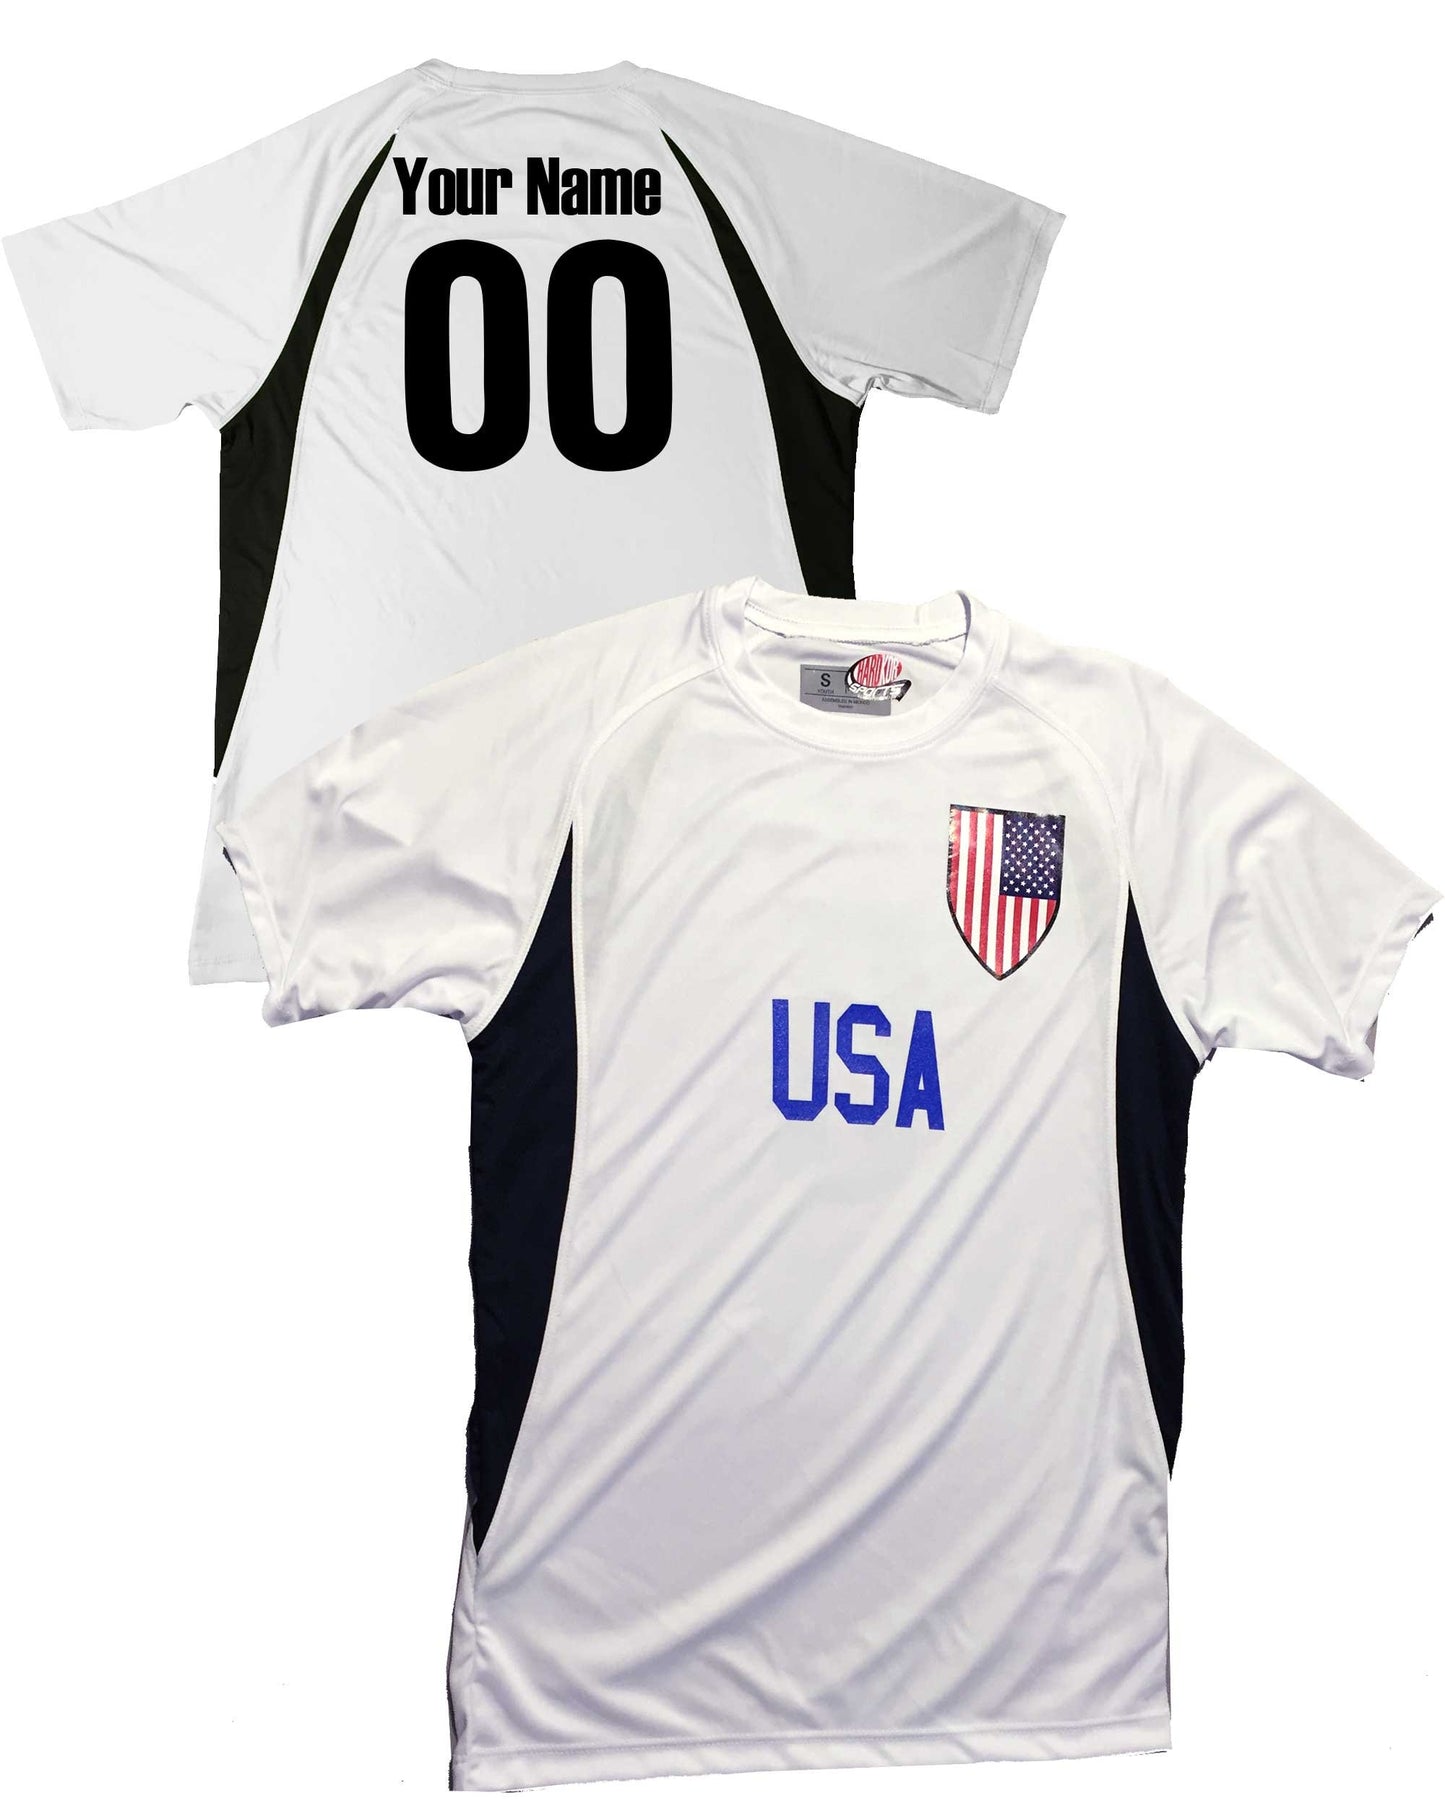 Custom USA Soccer Jersey with Shield Design Personalized with Your Names and Numbers in Your choice of Popular Colors